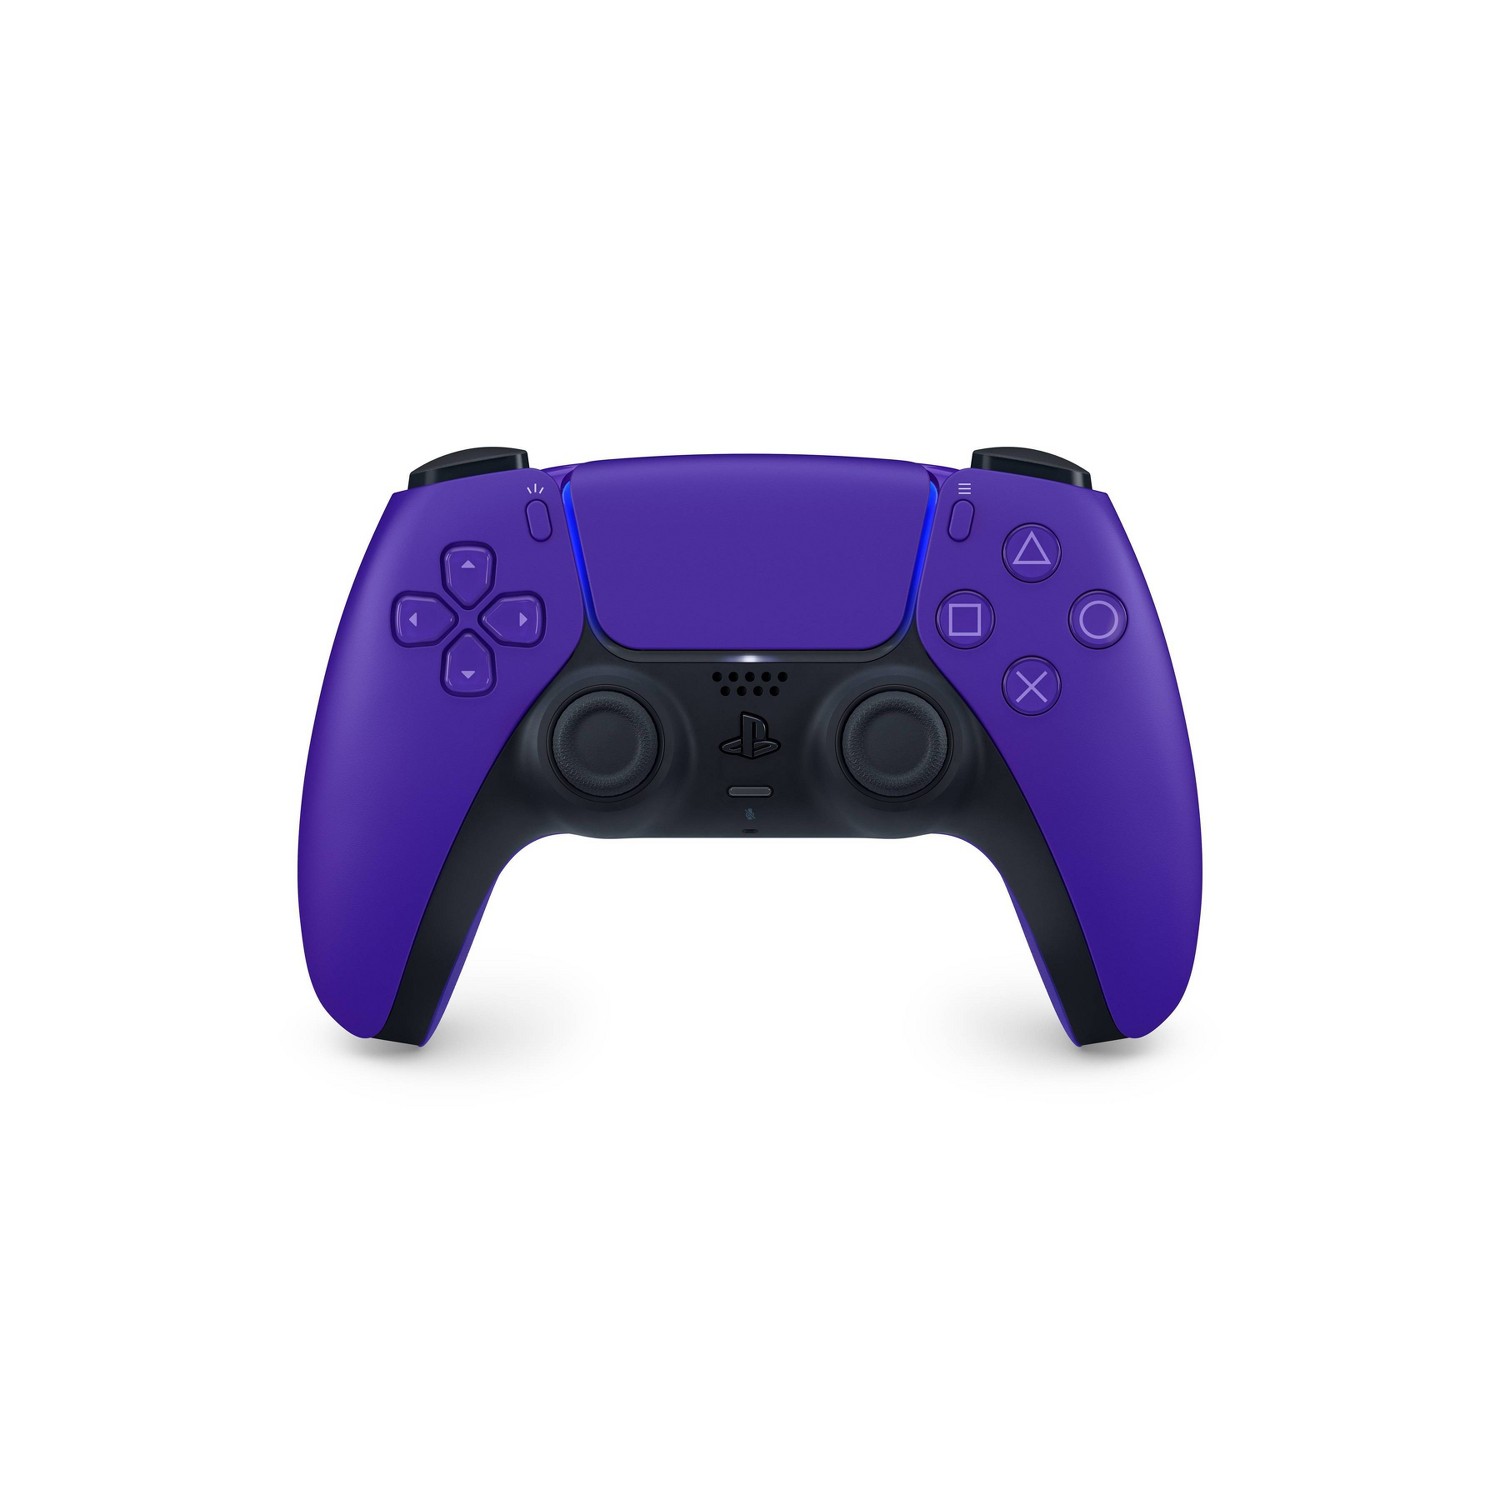 DualSense Wireless Controller for Sony PlayStation 5 (Purple) $59.99 + Free Shipping